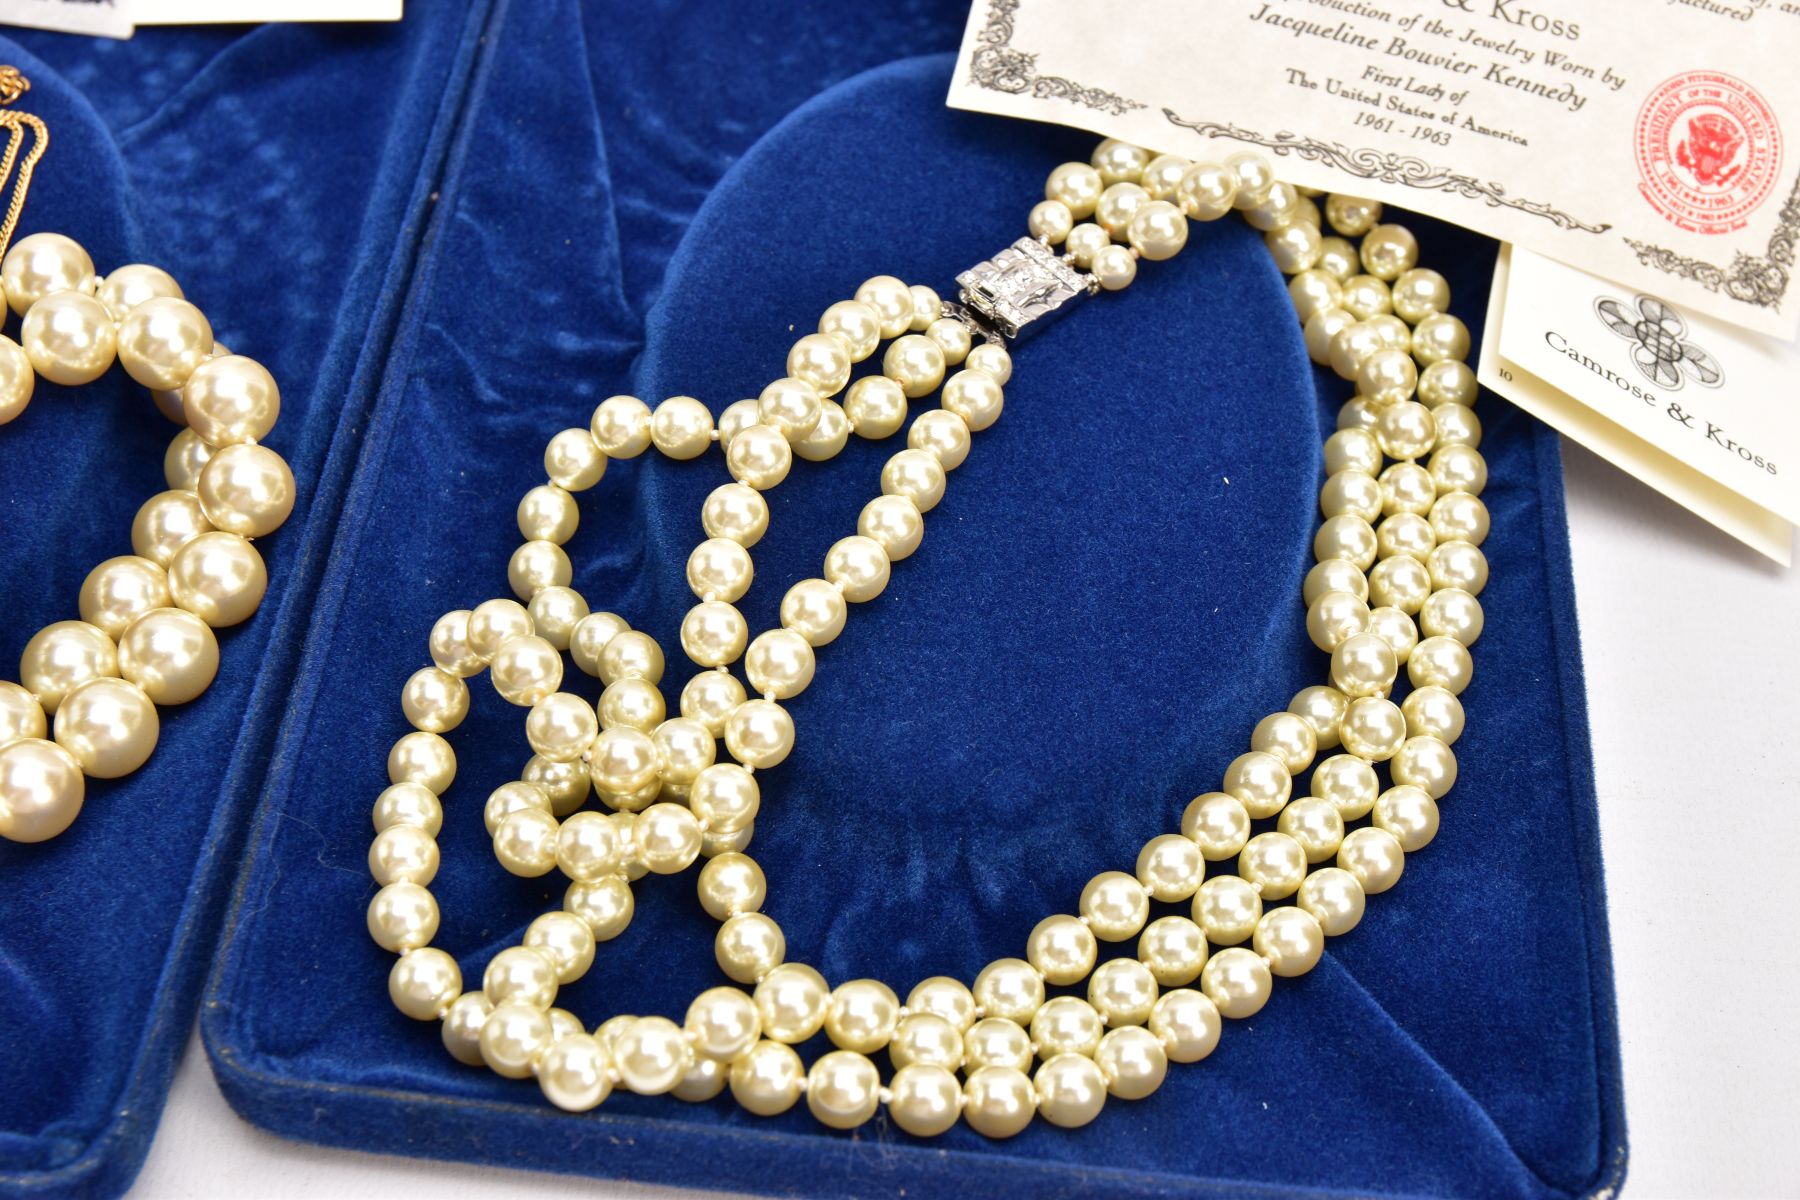 THREE PIECES OF 'JACQELINE BOUVIER KENNEDY' JEWELLERY, the first a boxed three strand imitation - Image 6 of 6